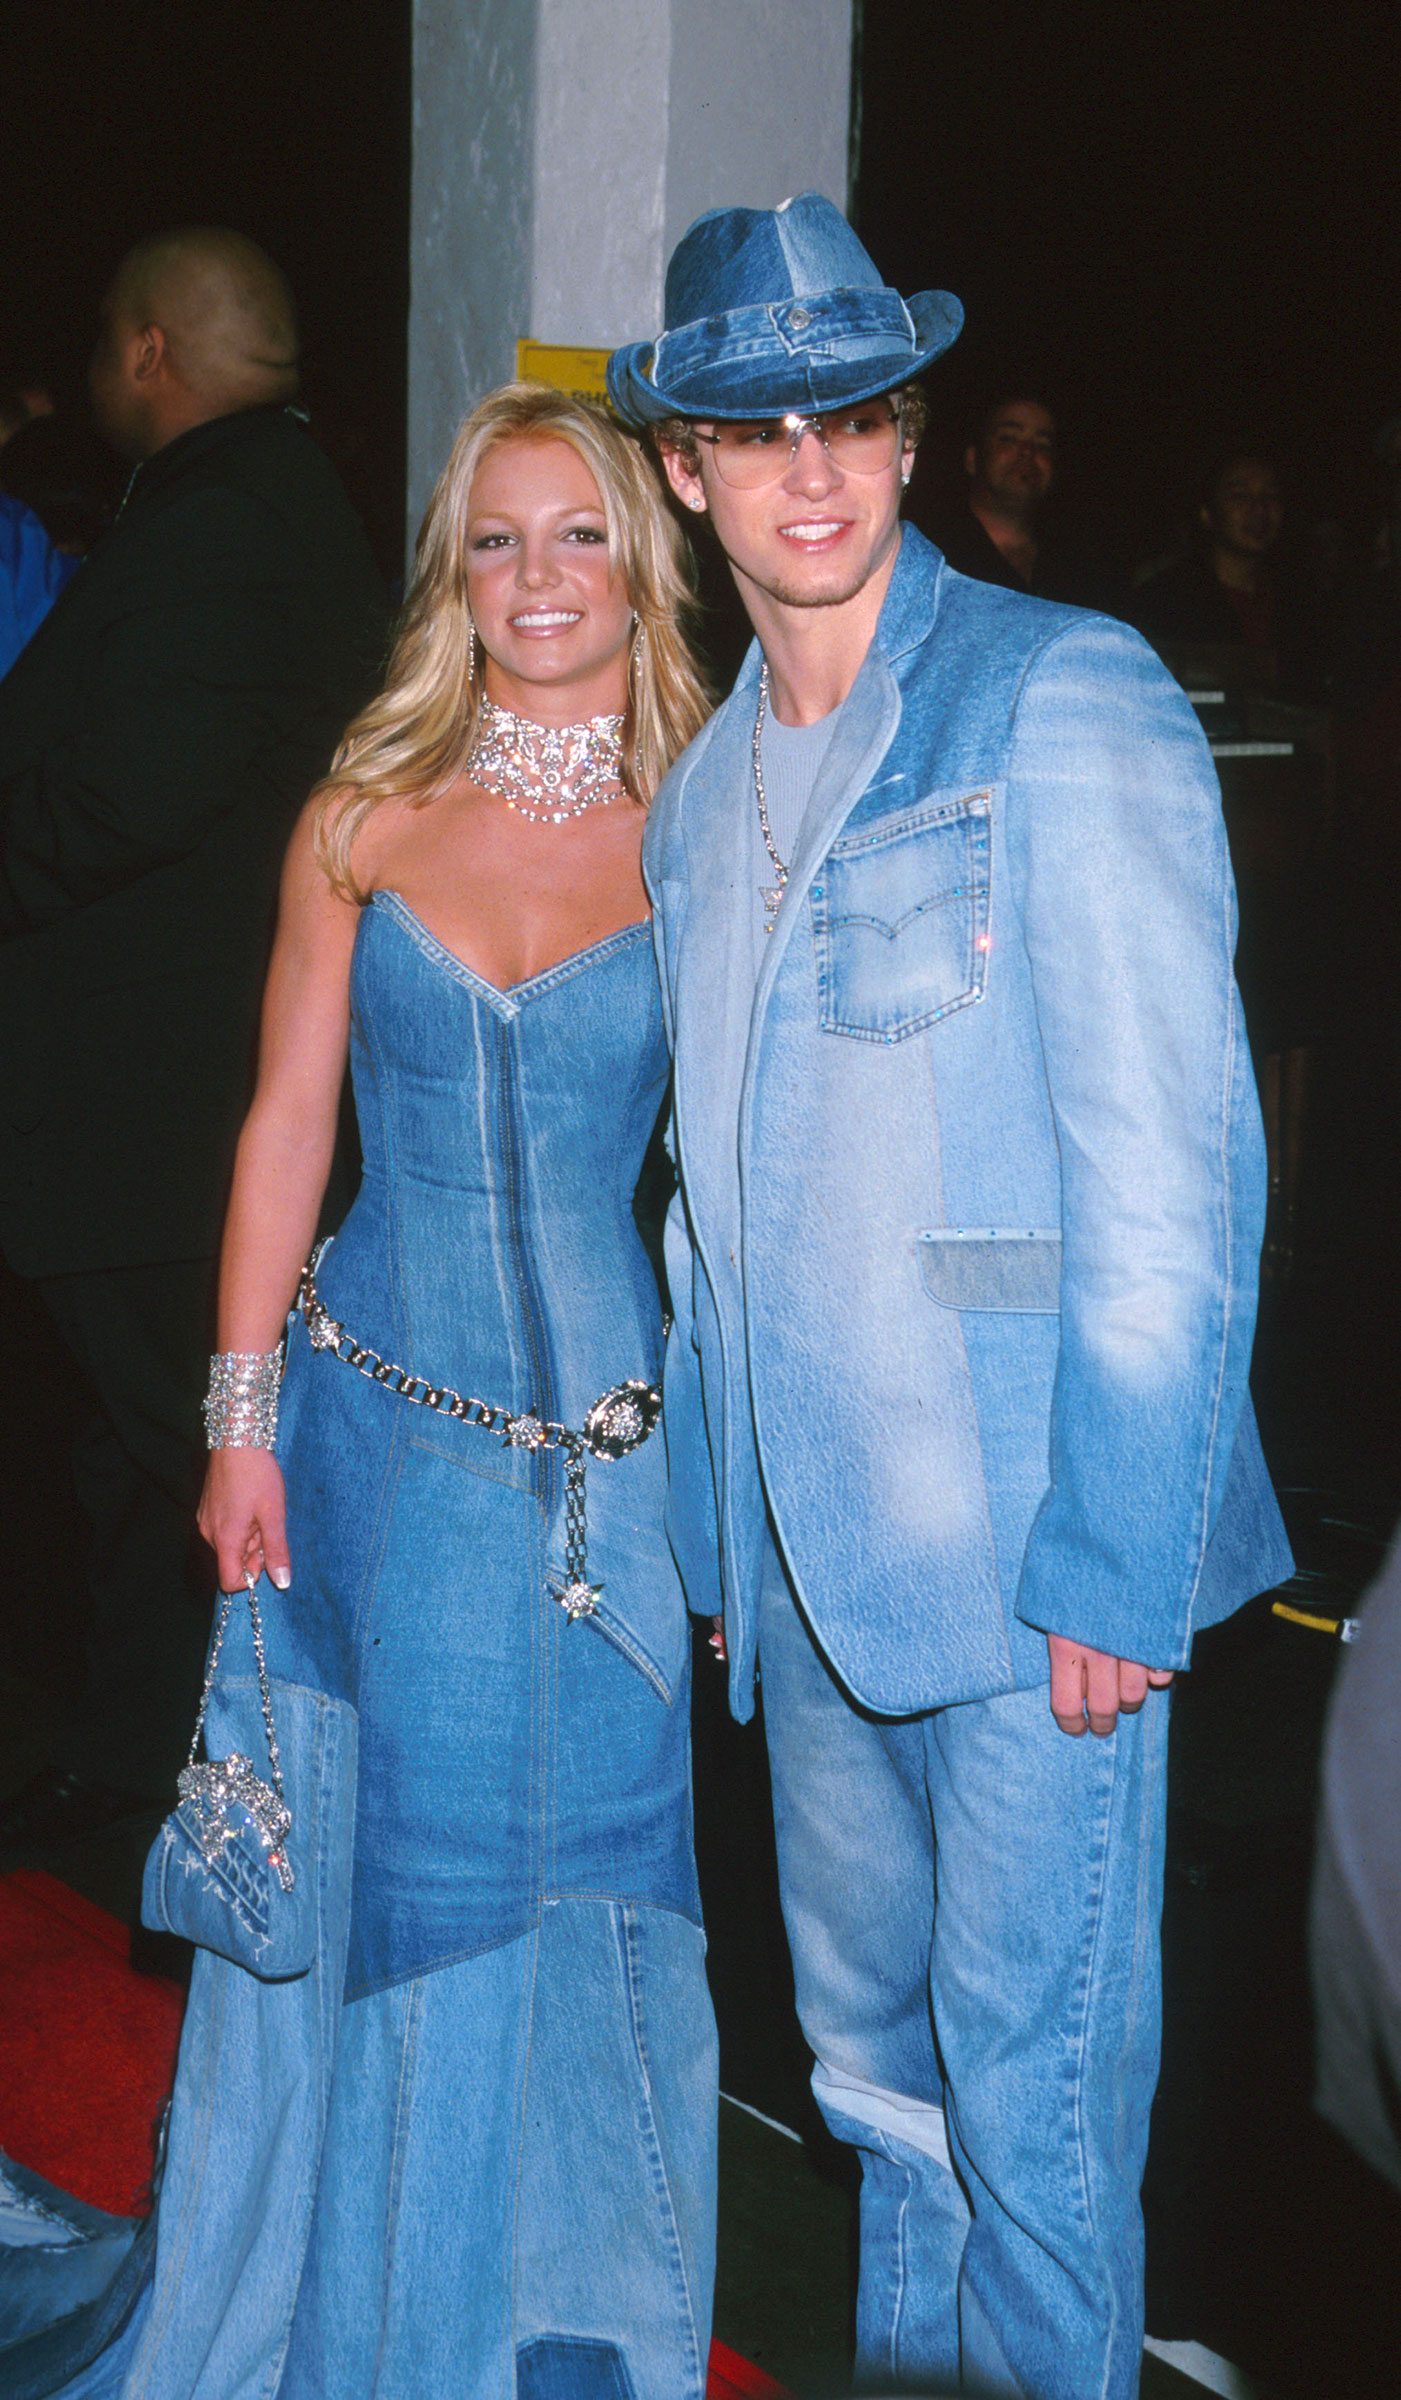 Spears and Justin Timberlake at the Shrine Auditorium in Los Angeles in 2001.